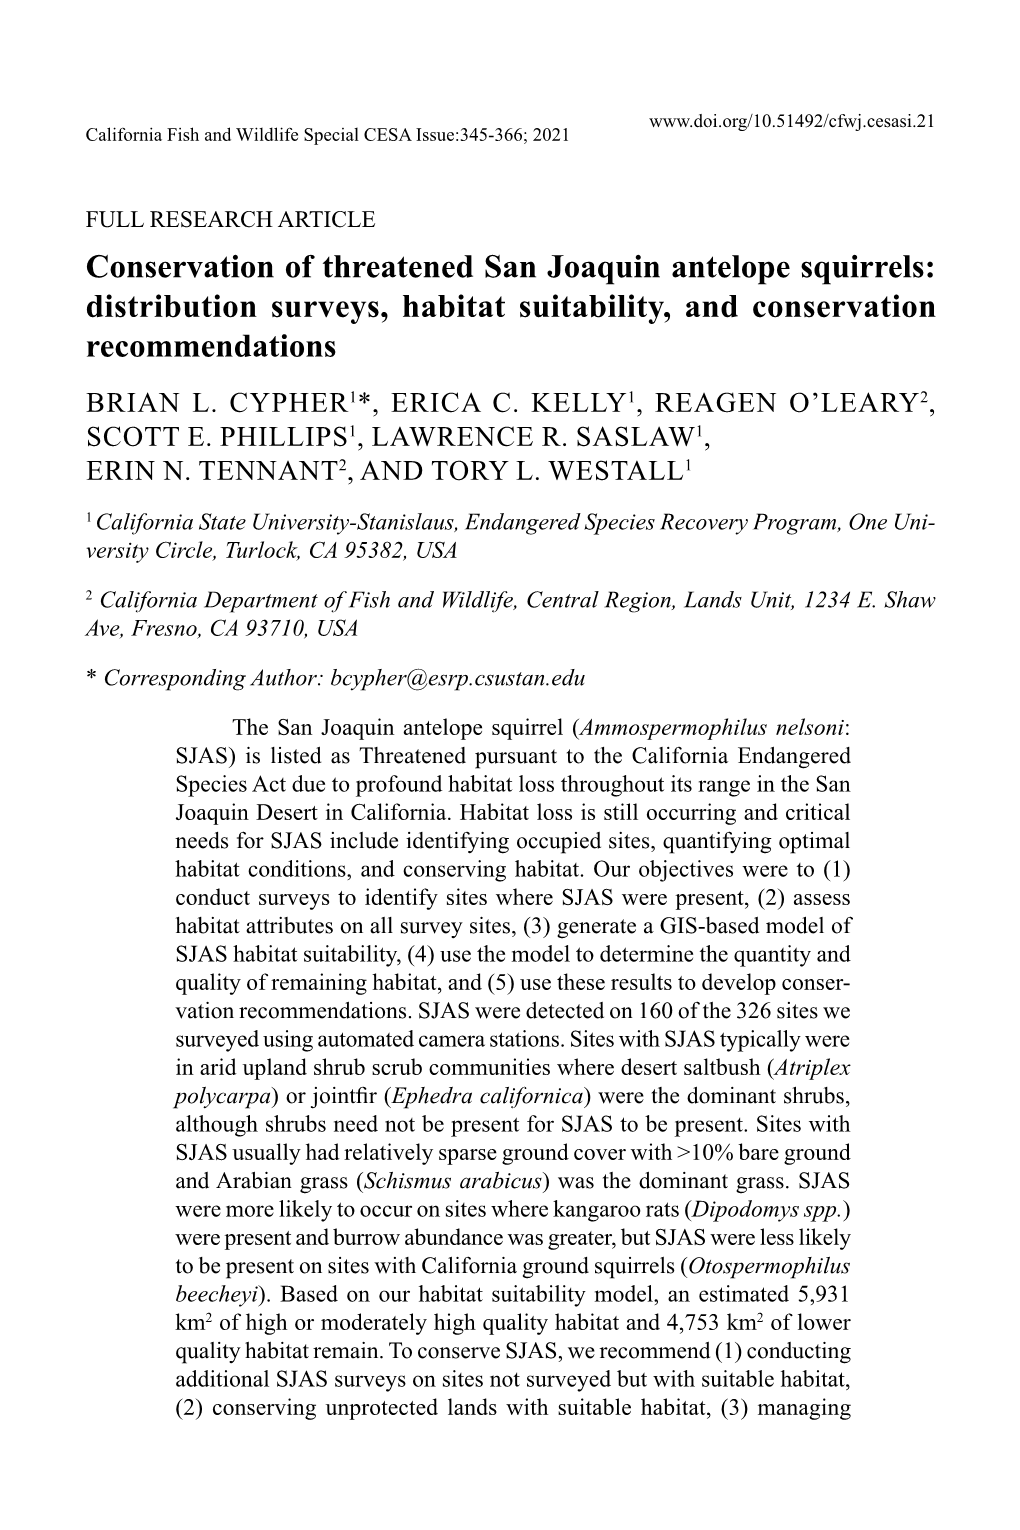 Conservation of Threatened San Joaquin Antelope Squirrels: Distribution Surveys, Habitat Suitability, and Conservation Recommendations BRIAN L